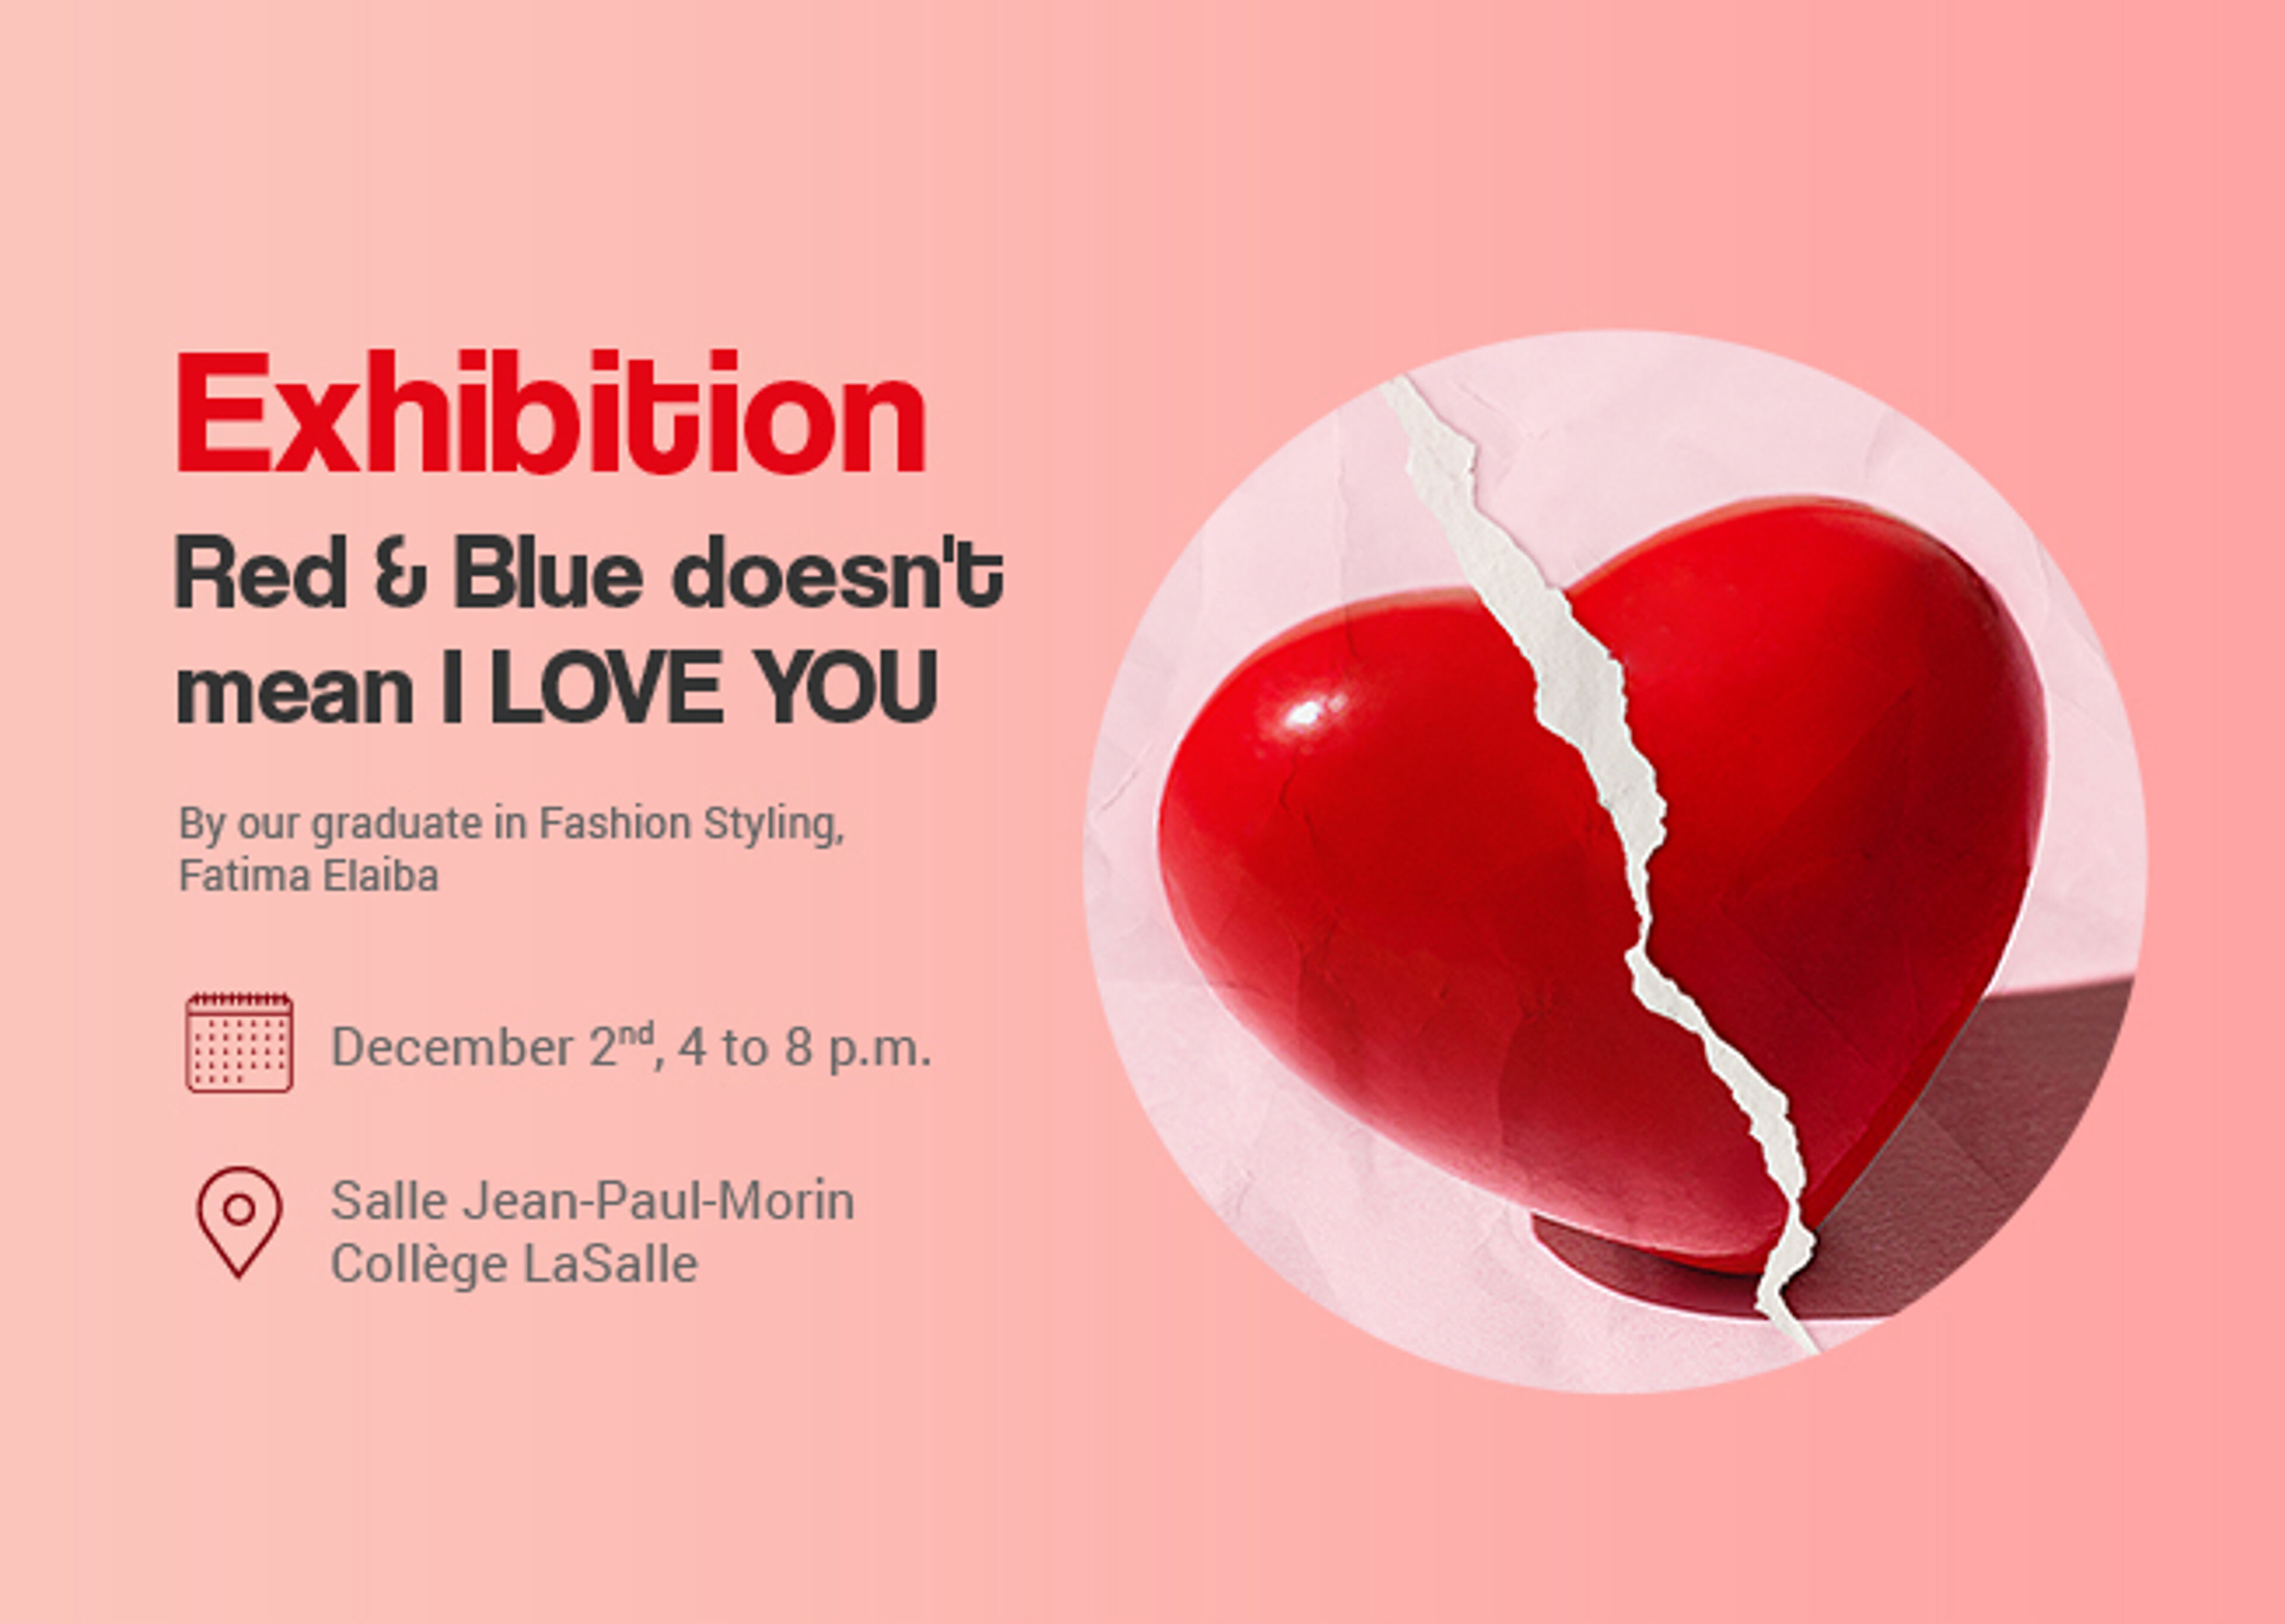  Poster for "Red & Blue doesn't mean I LOVE YOU" exhibition by Fashion Styling graduate Fatima Elaiba on December 2nd.

